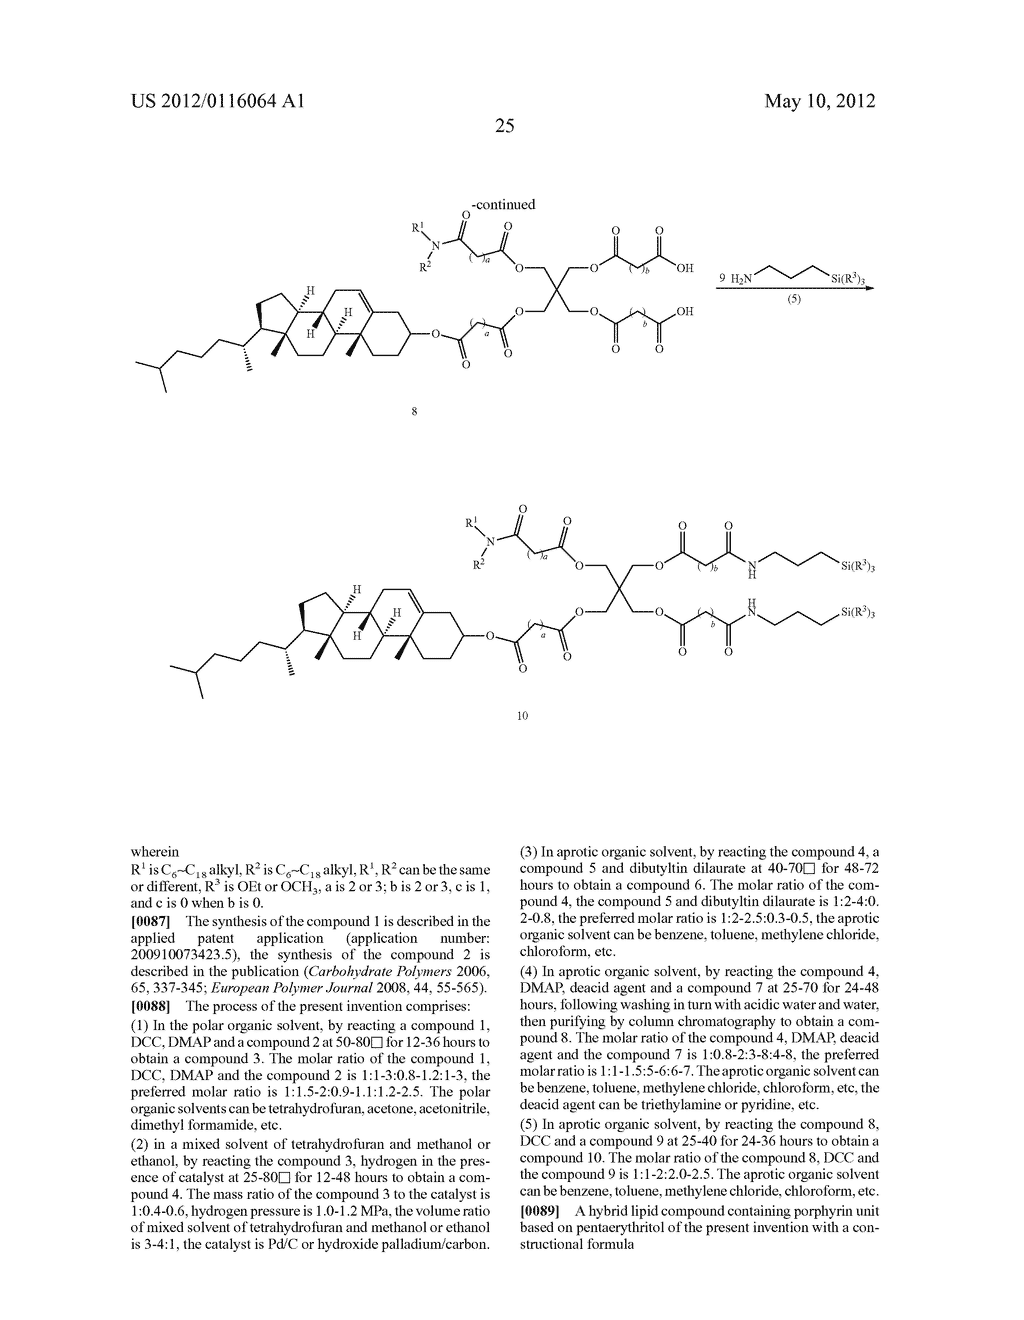 HYBRID LIPID COMPOUNDS BASED ON PENTAERYTHRITOL, INTERMEDIATES,     PREPARATION METHODS AND USE THEREOF - diagram, schematic, and image 33